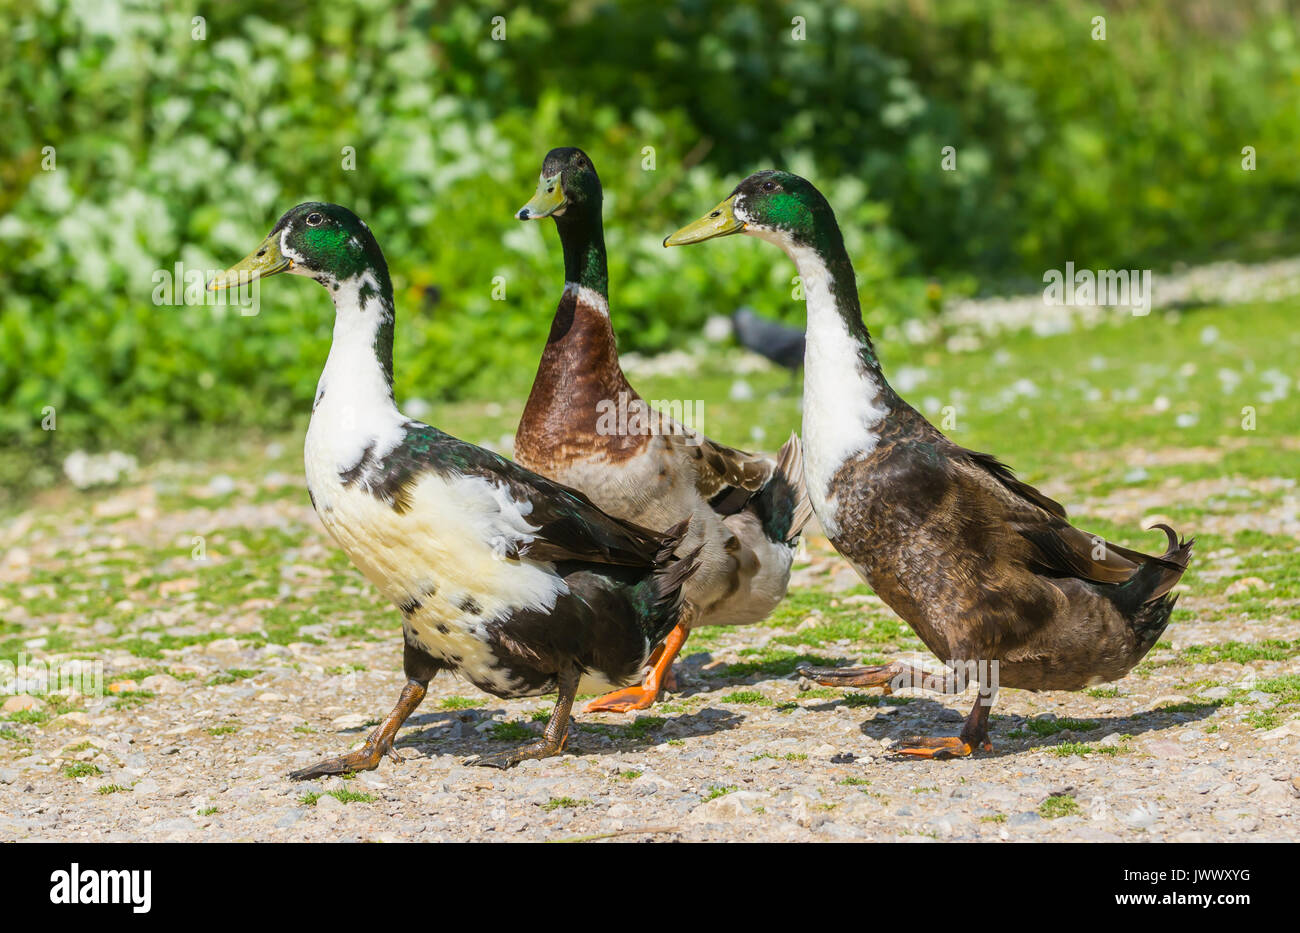 Domesticated Ducks (Anas platyrhynchos domesticus), possibly Mallard hybrids, walking upright on land in West Sussex, England, UK. Stock Photo